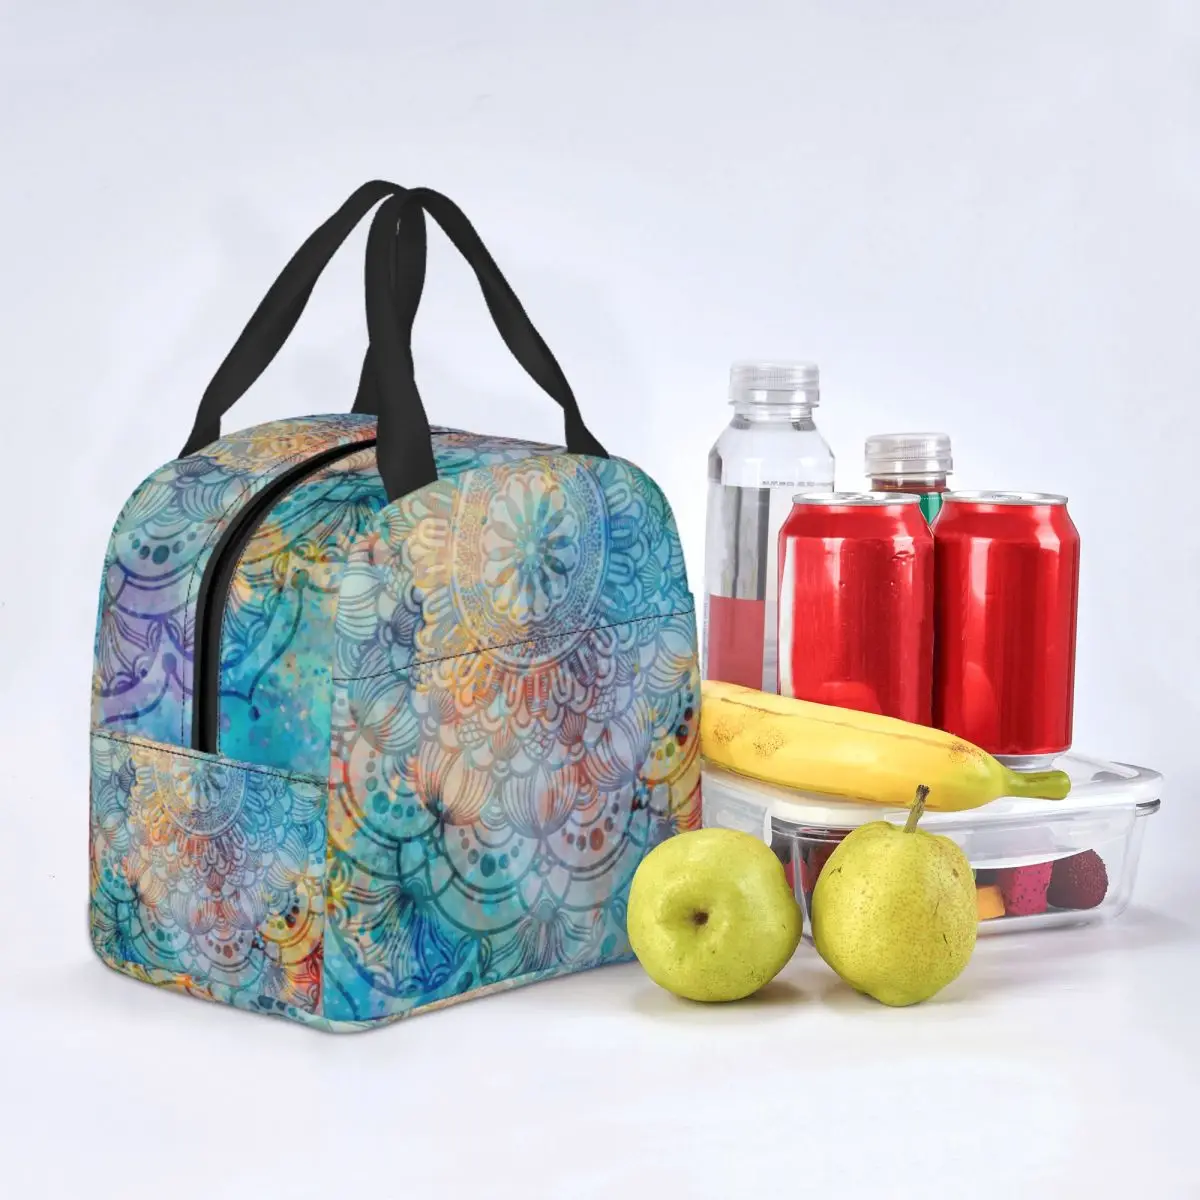 

Bohemian Psychedelic Mandala Lunch Bag Waterproof Insulated Cooler Bag Colourful Thermal Food Picnic Lunch Box for Women Kids